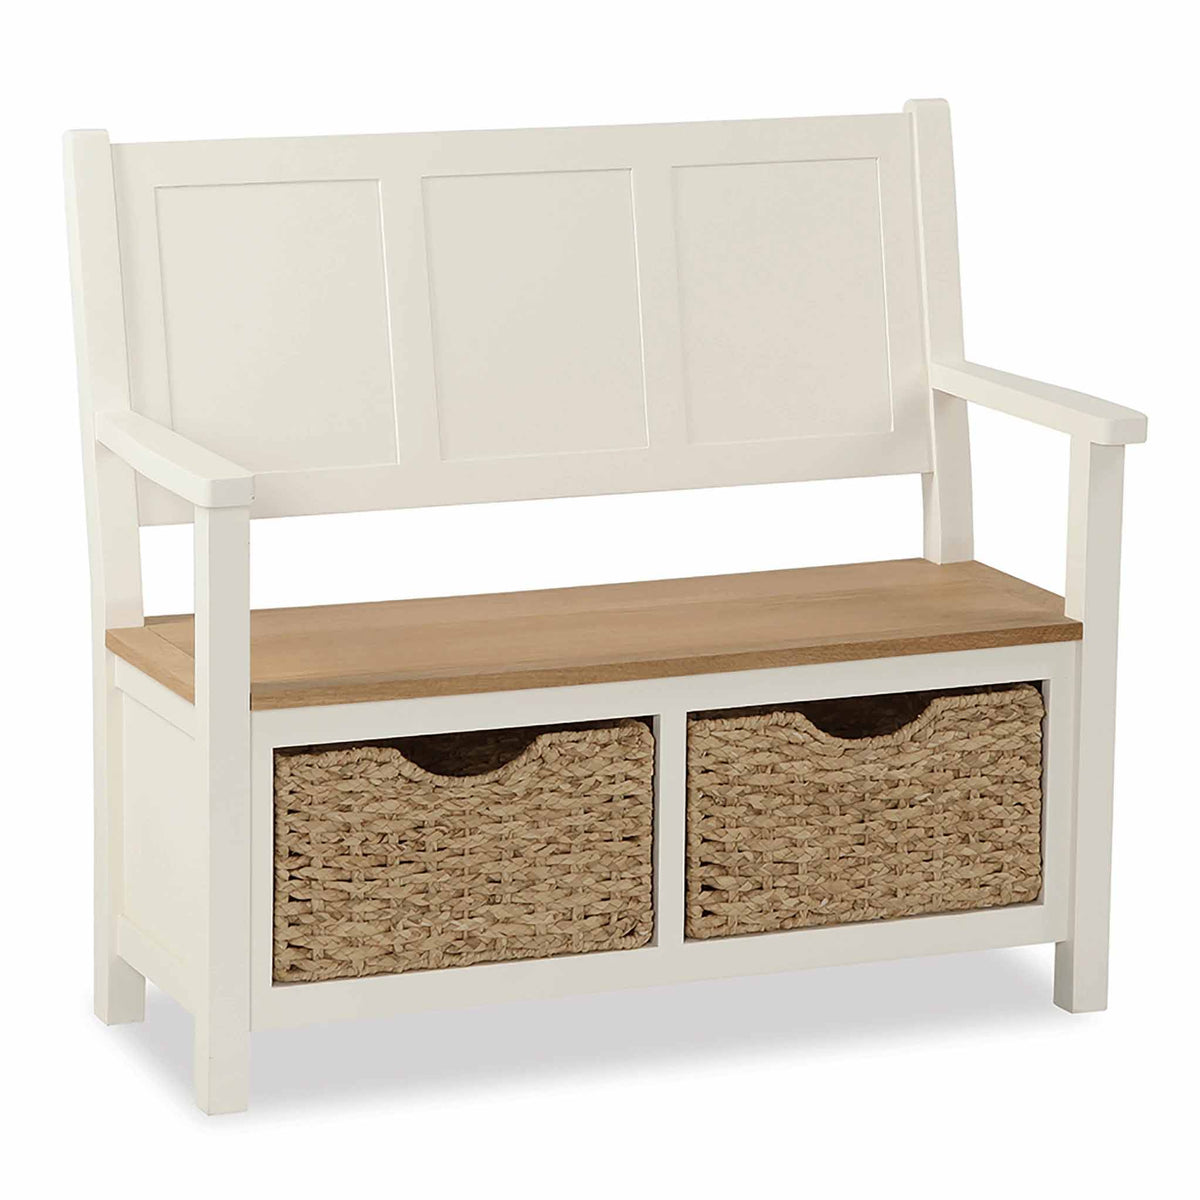 The Daymer Cream Wooden Hallway Storage Bench with Baskets from Roseland Furniture